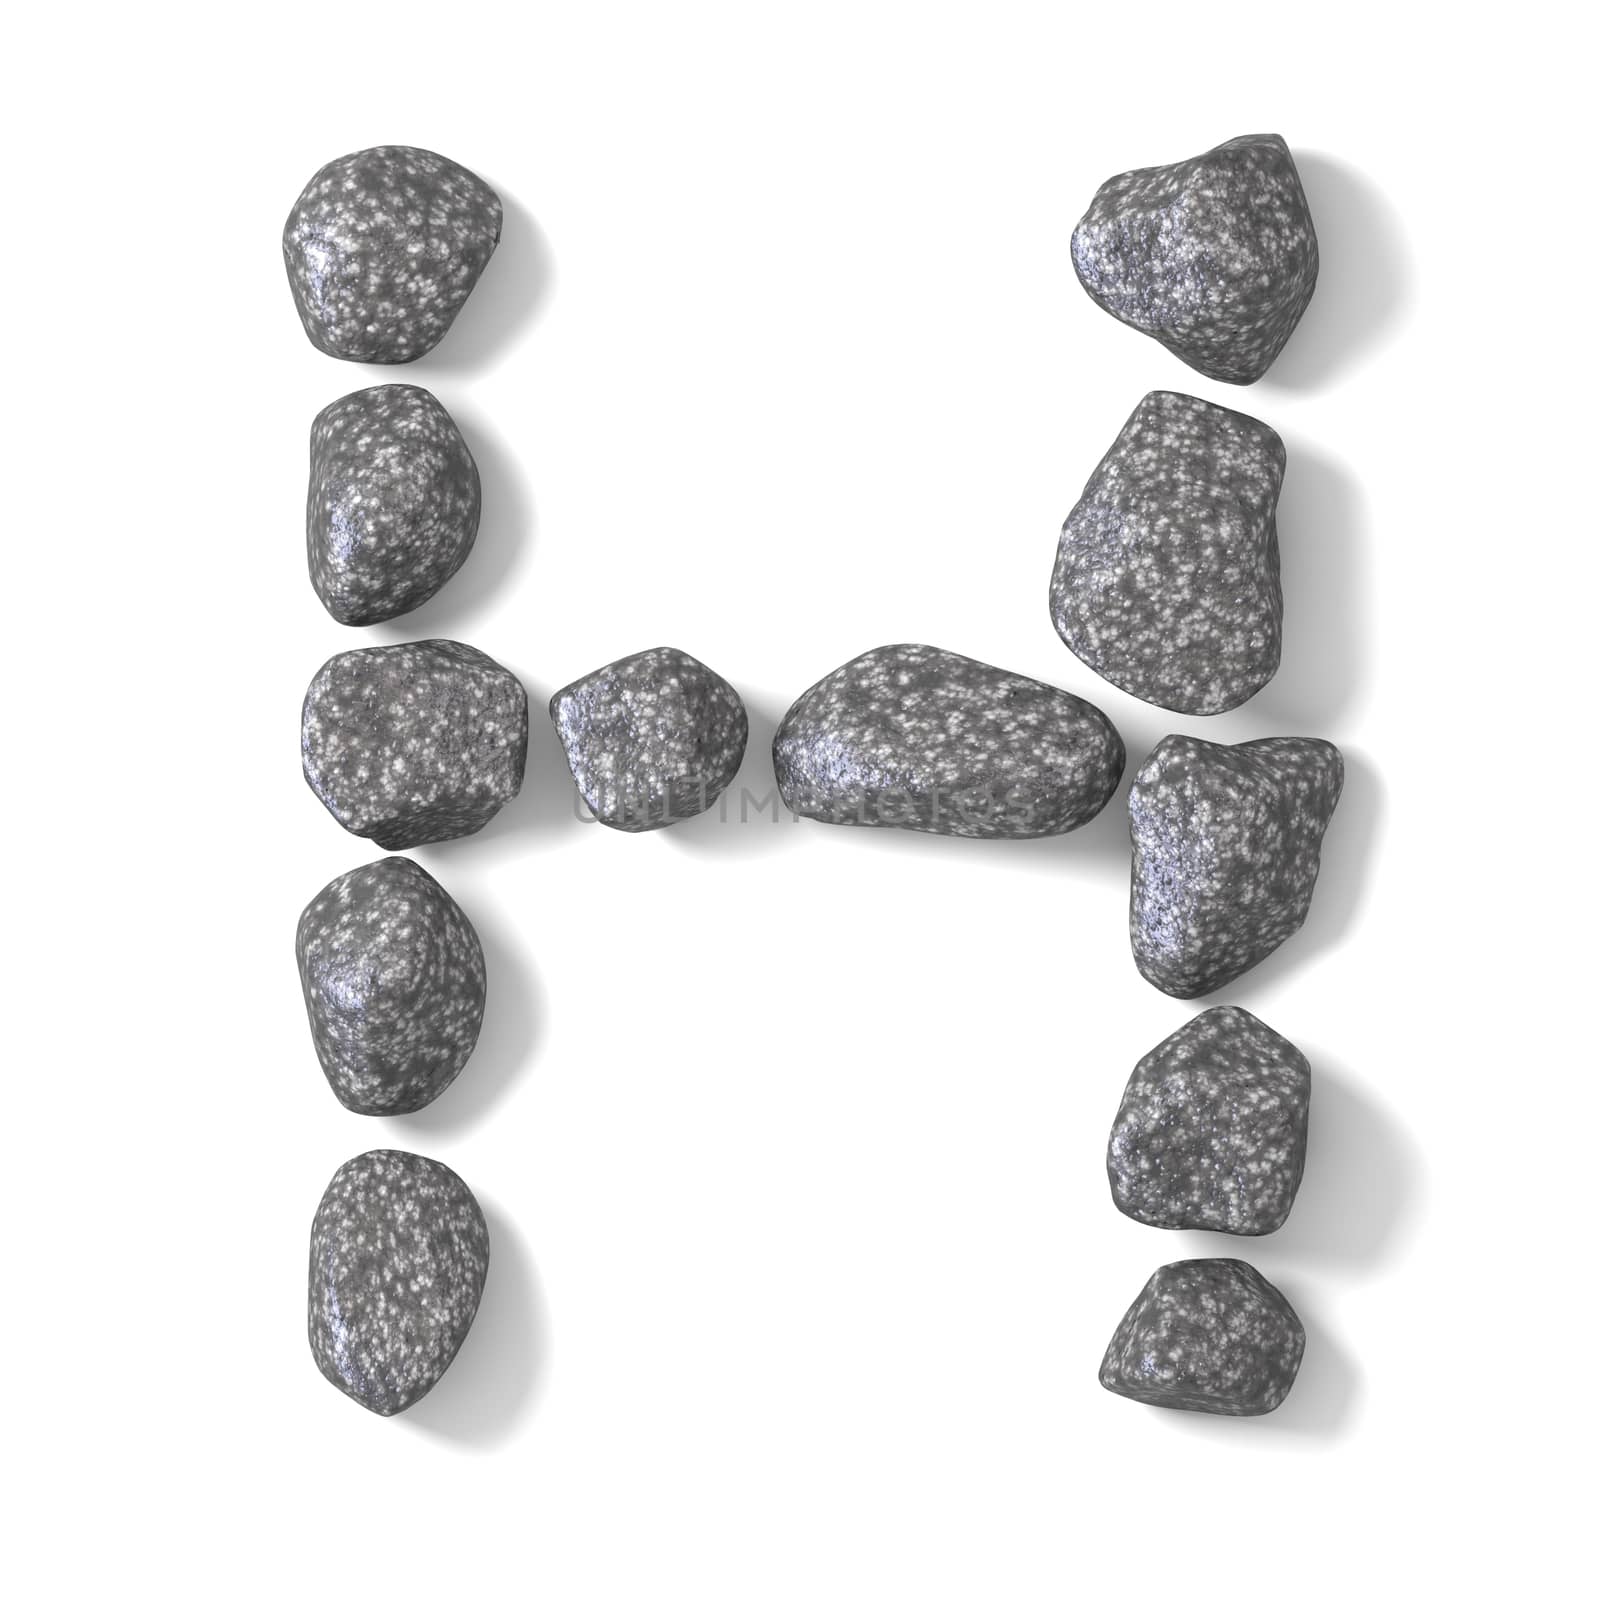 Font made of rocks LETTER H 3D by djmilic